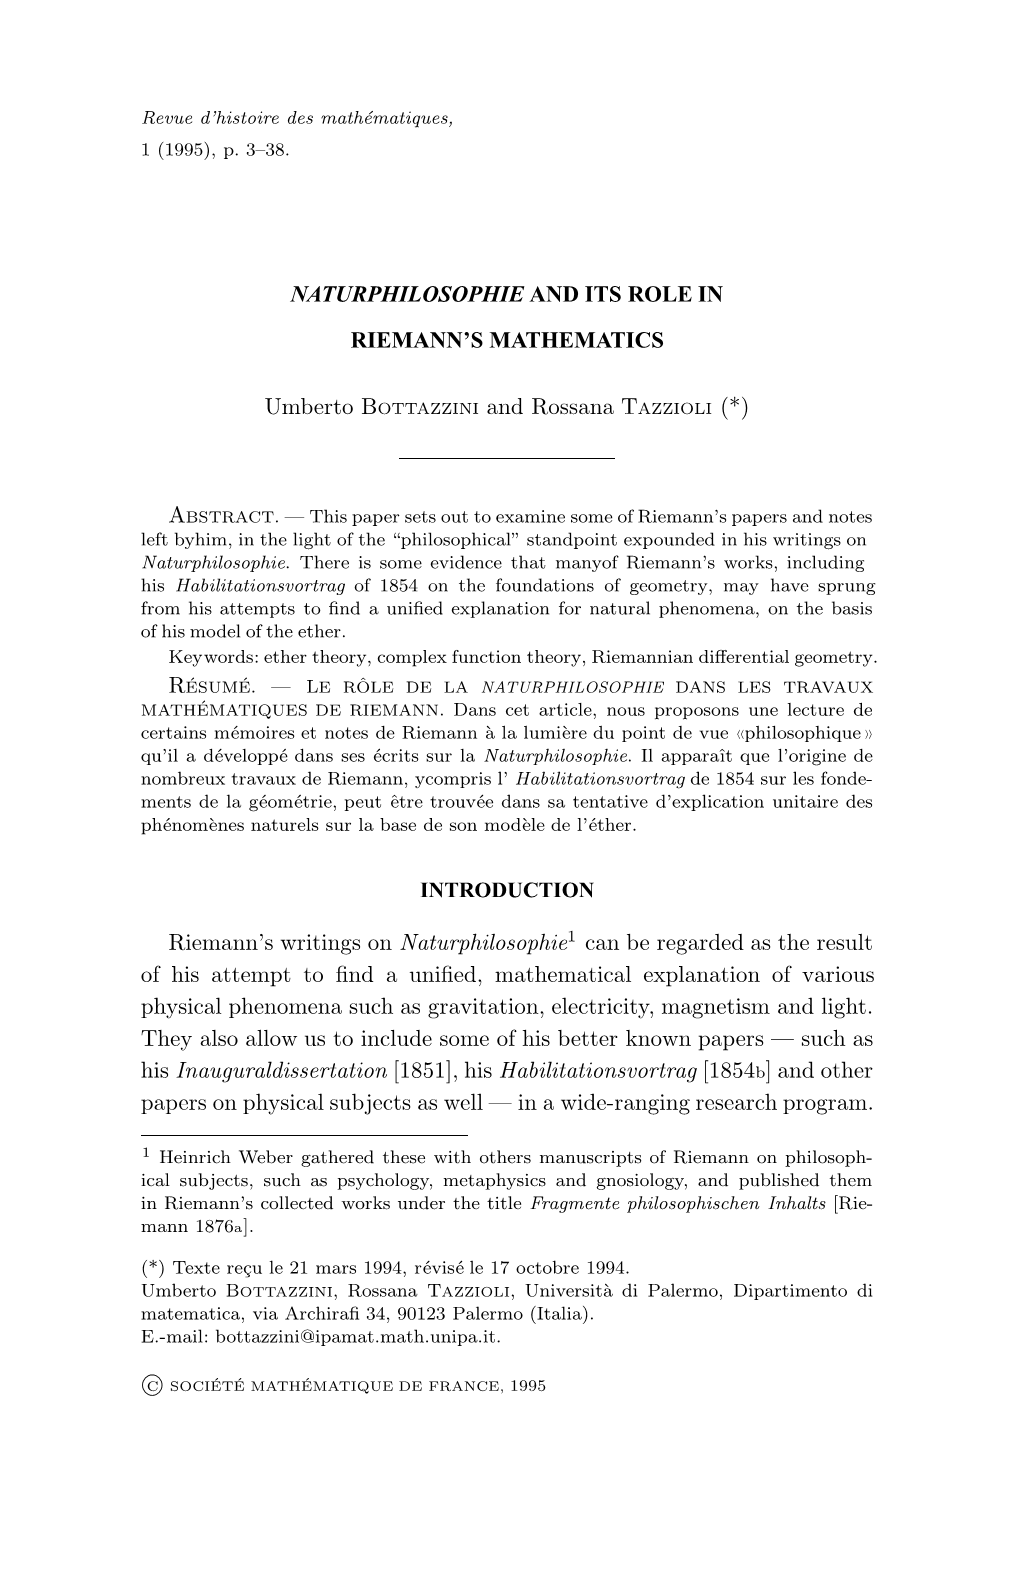 Naturphilosophie and Its Role in Riemann's Mathematics